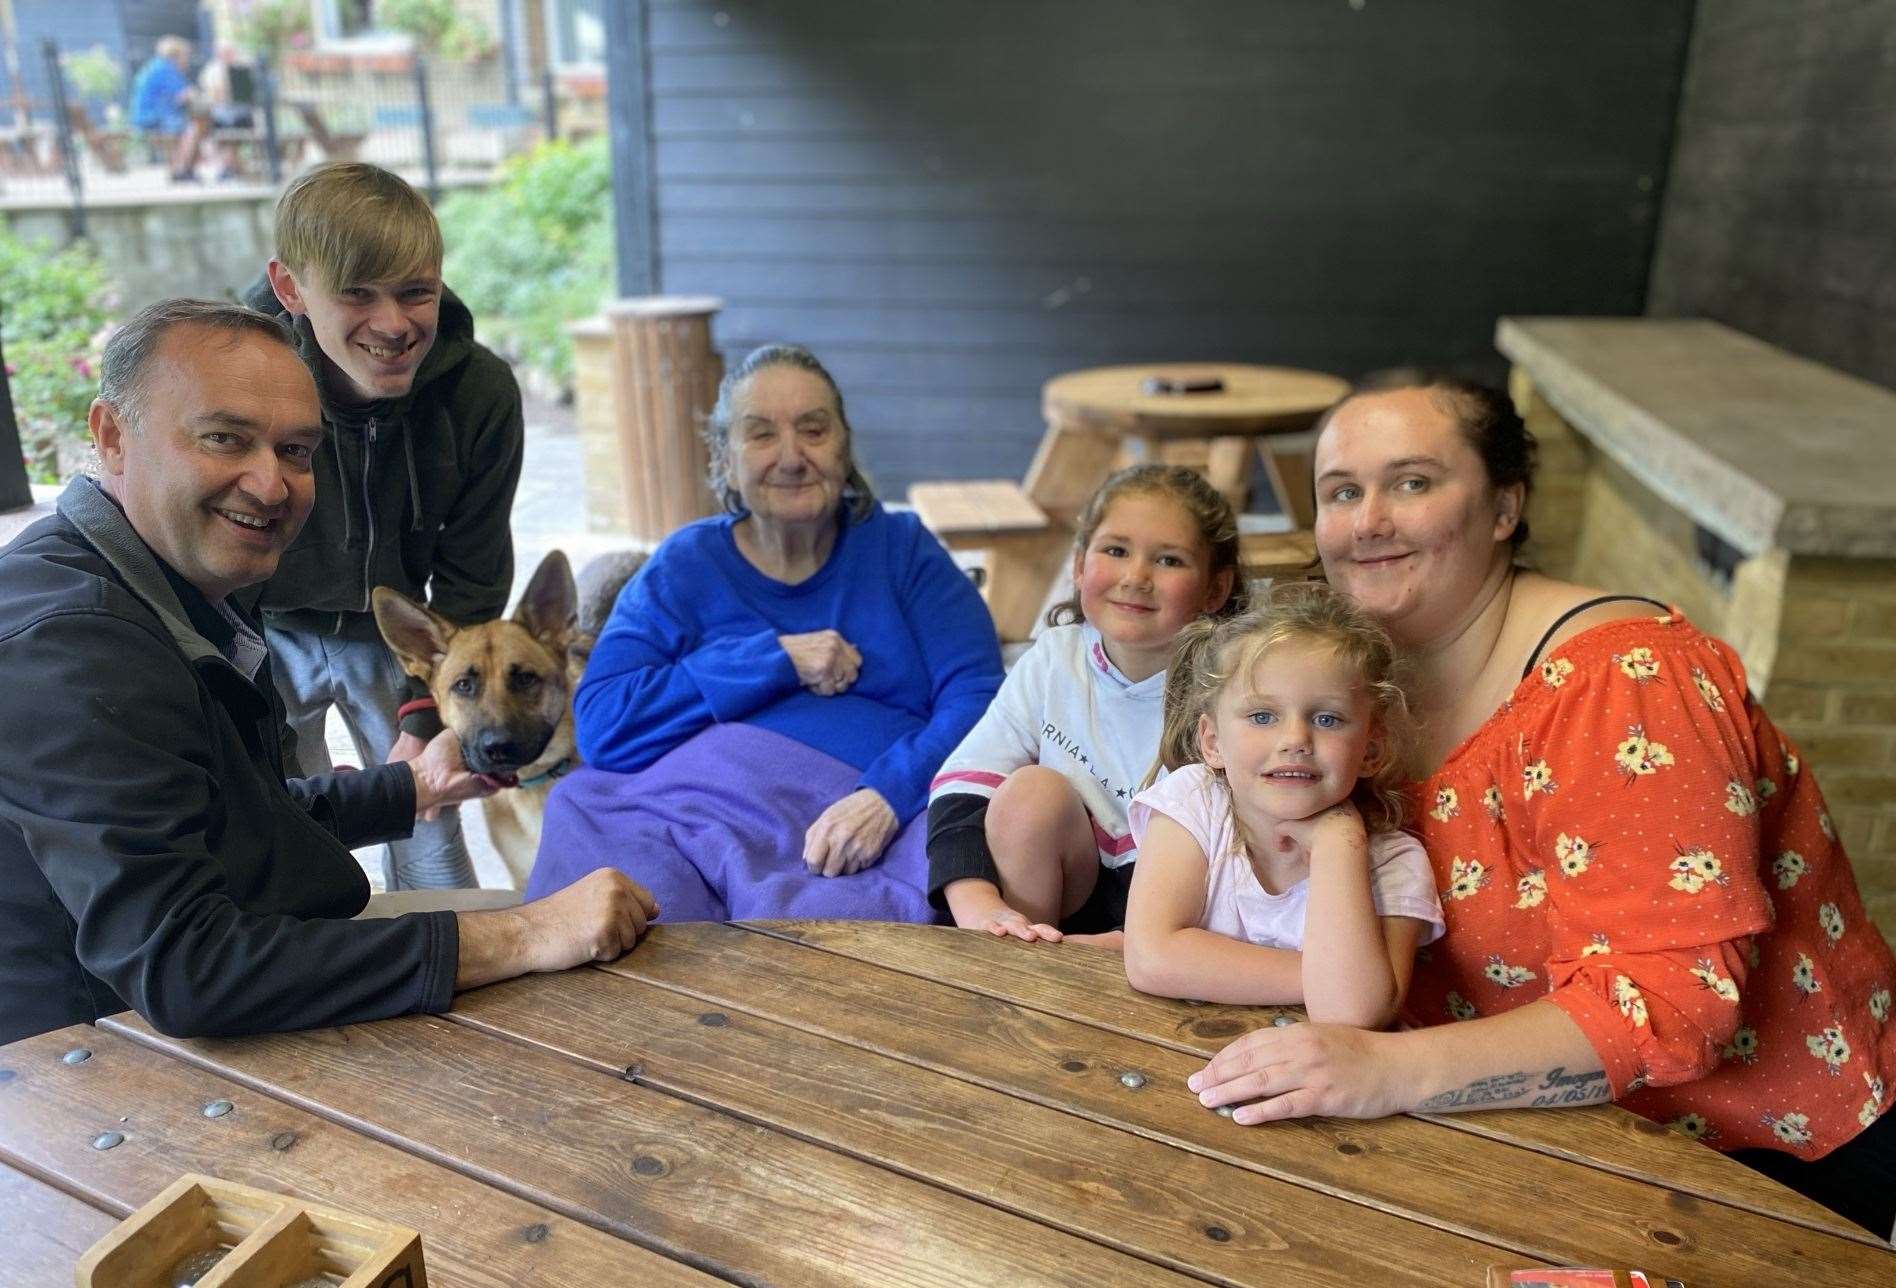 Sonia with her son Paul, grandson Josh, Bentley the dog, great grandaughters Imogen and Phoebe and grandaughter Katie